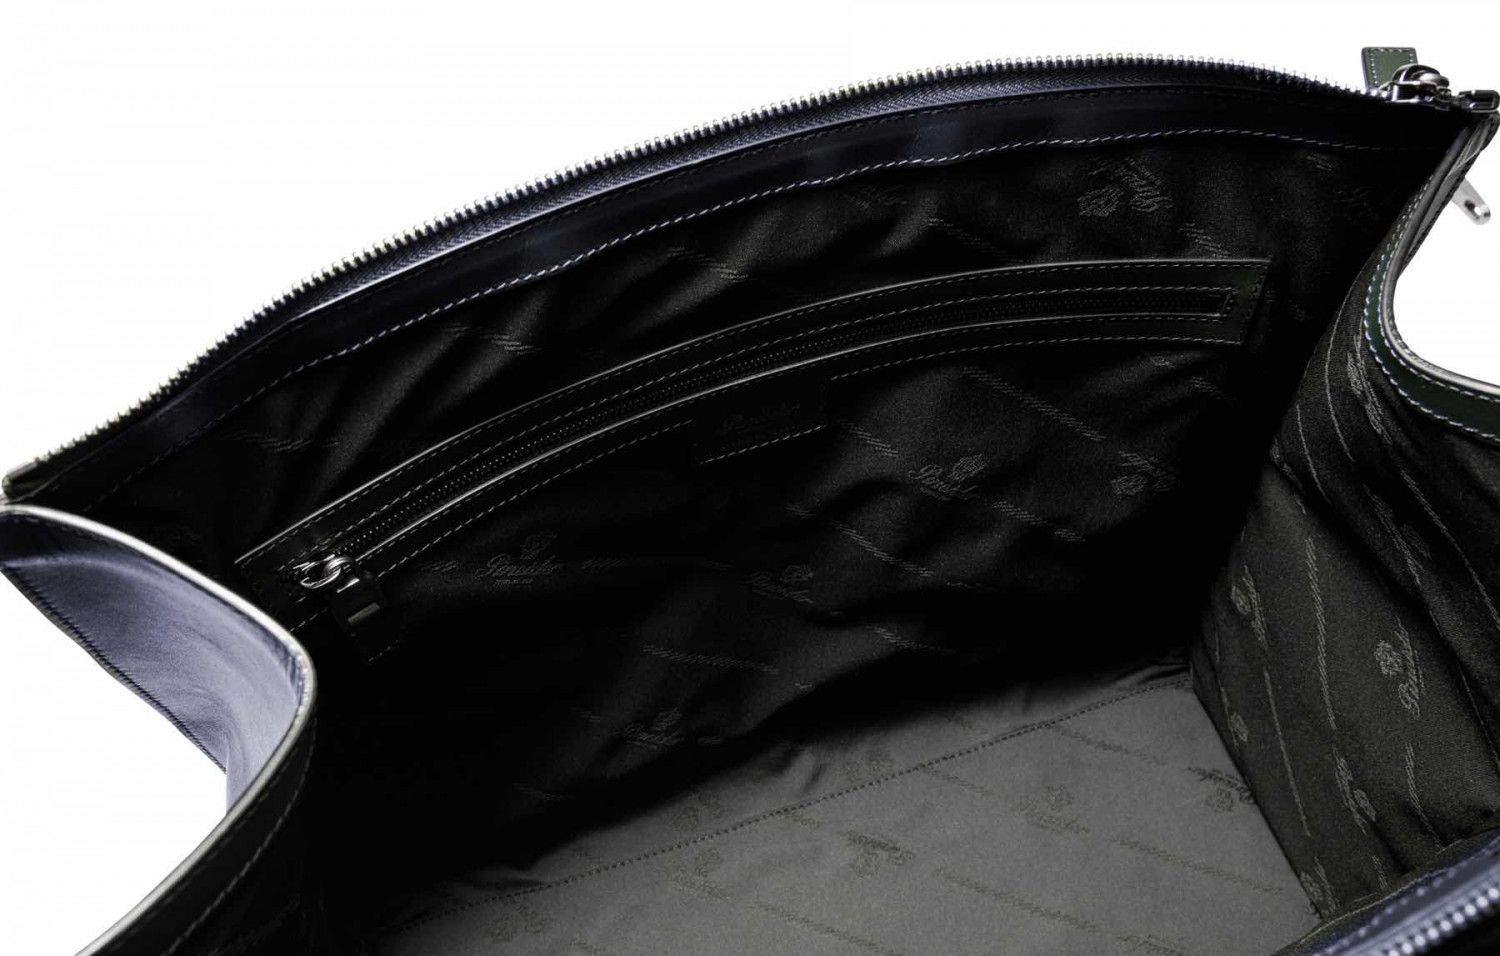 Grained Collection Duffle Doc Bag